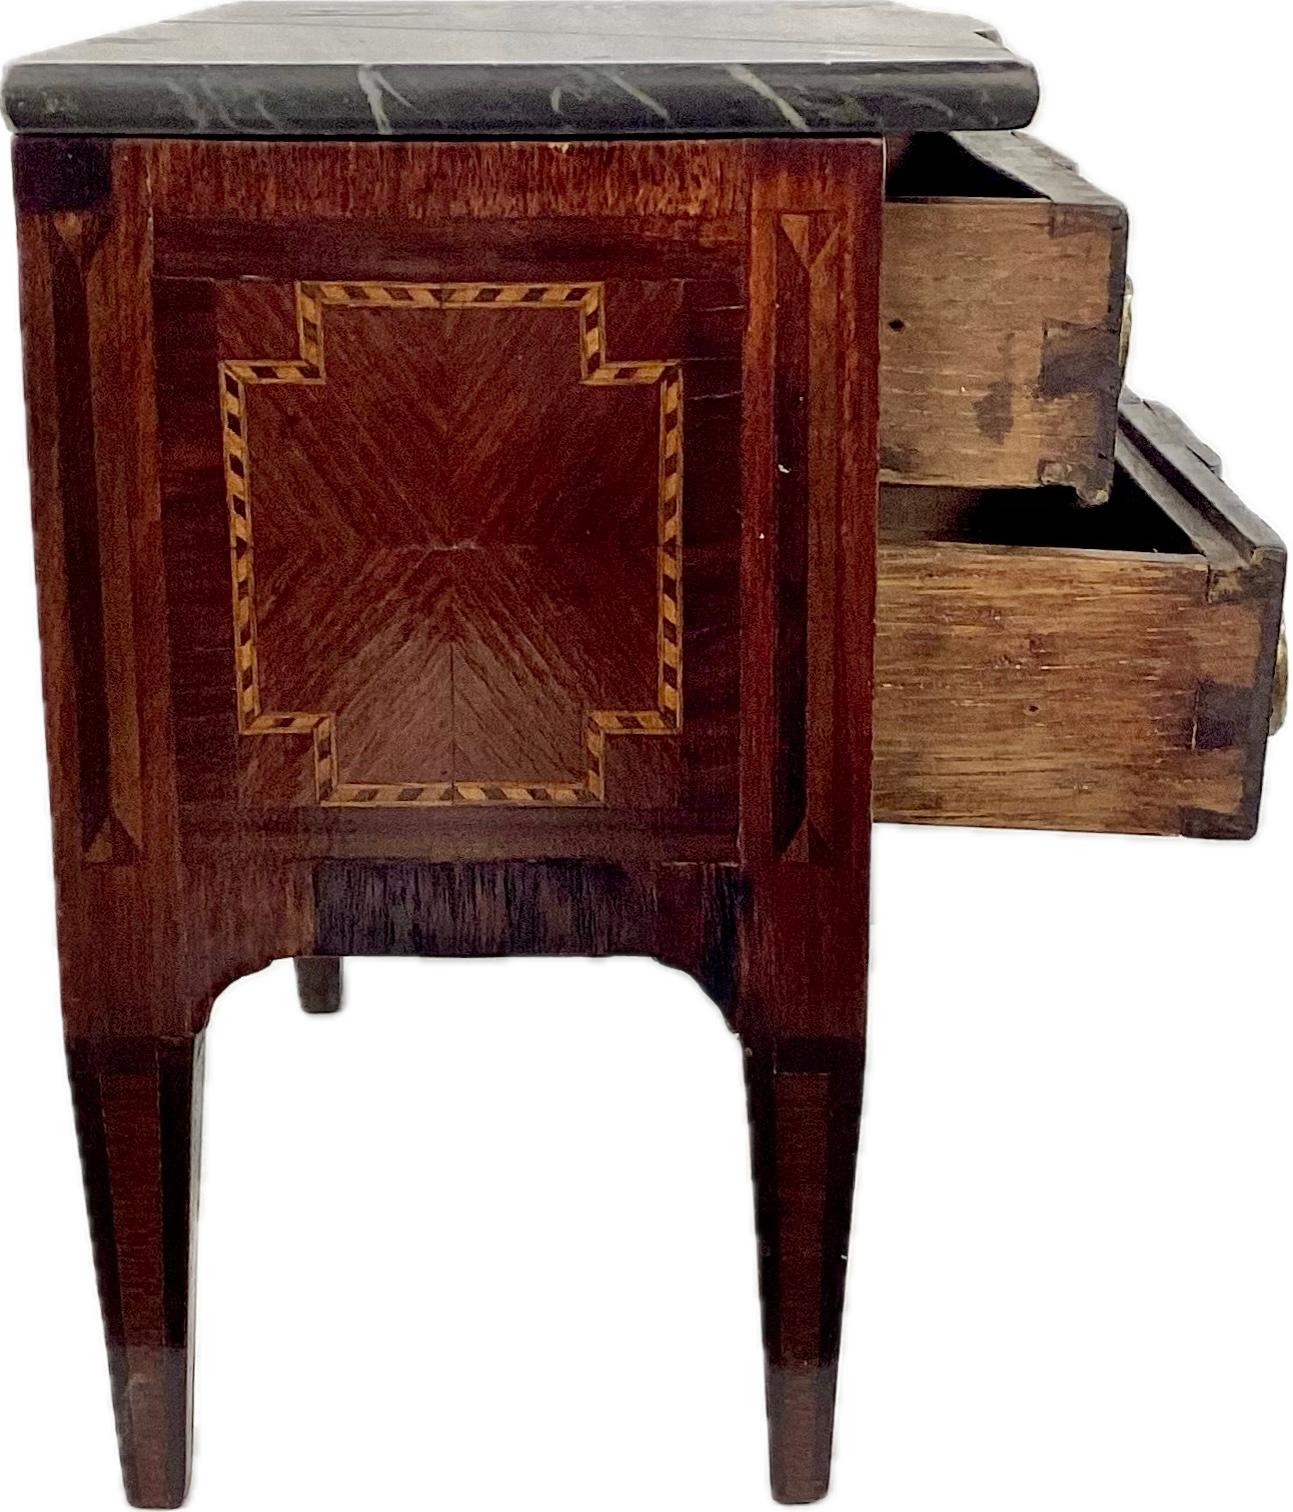 French Miniature Louie XVI Style Inlaid Chest of Drawers With Marble Top For Sale